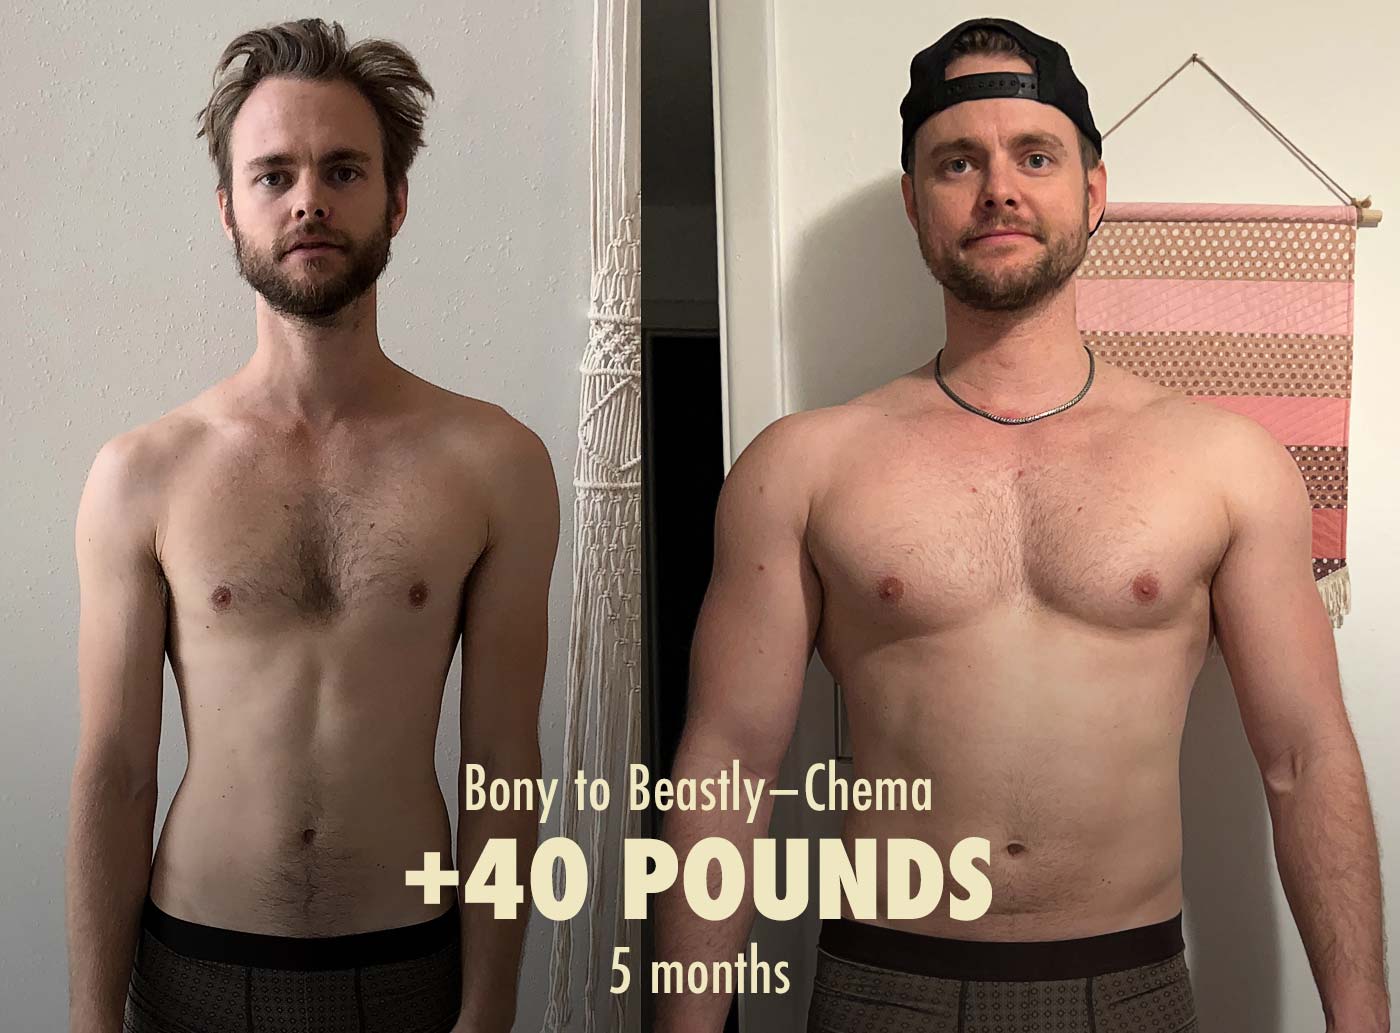 Before and after photo showing a skinny guy bulking up by eating at a fast food bulking restaurant every day.